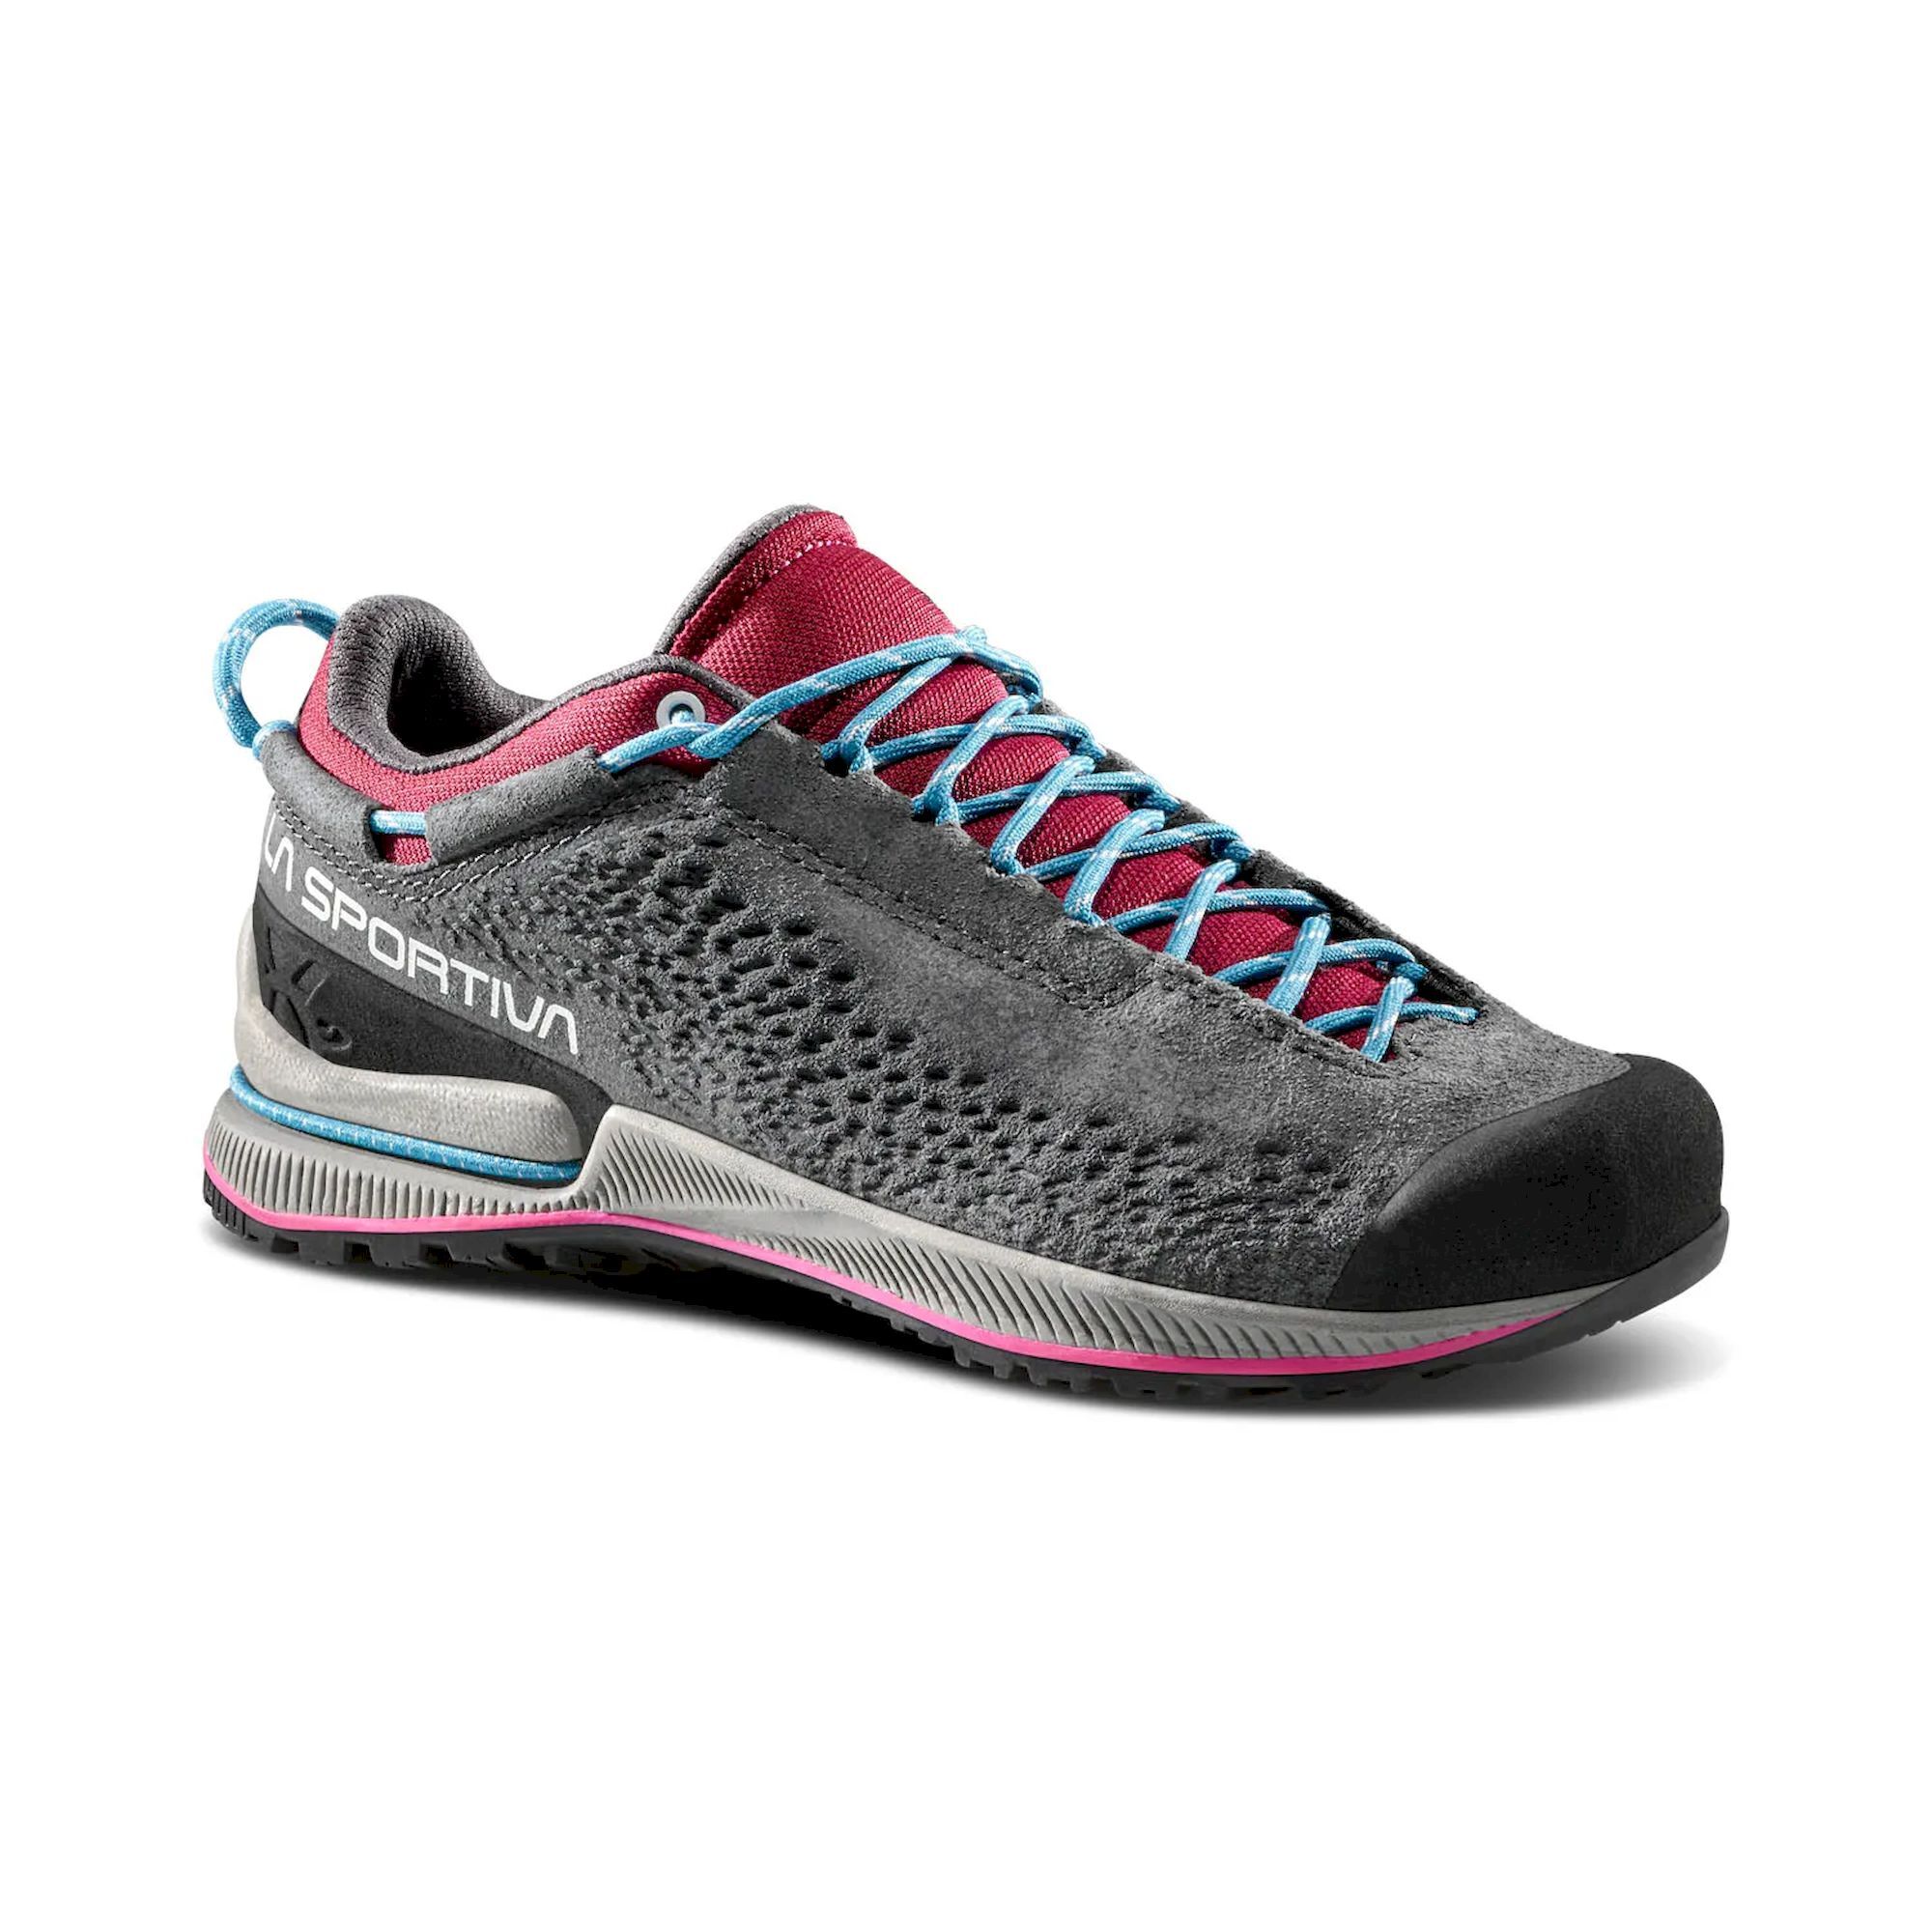 La Sportiva TX2 Evo Leather - Chaussures approche femme | Hardloop